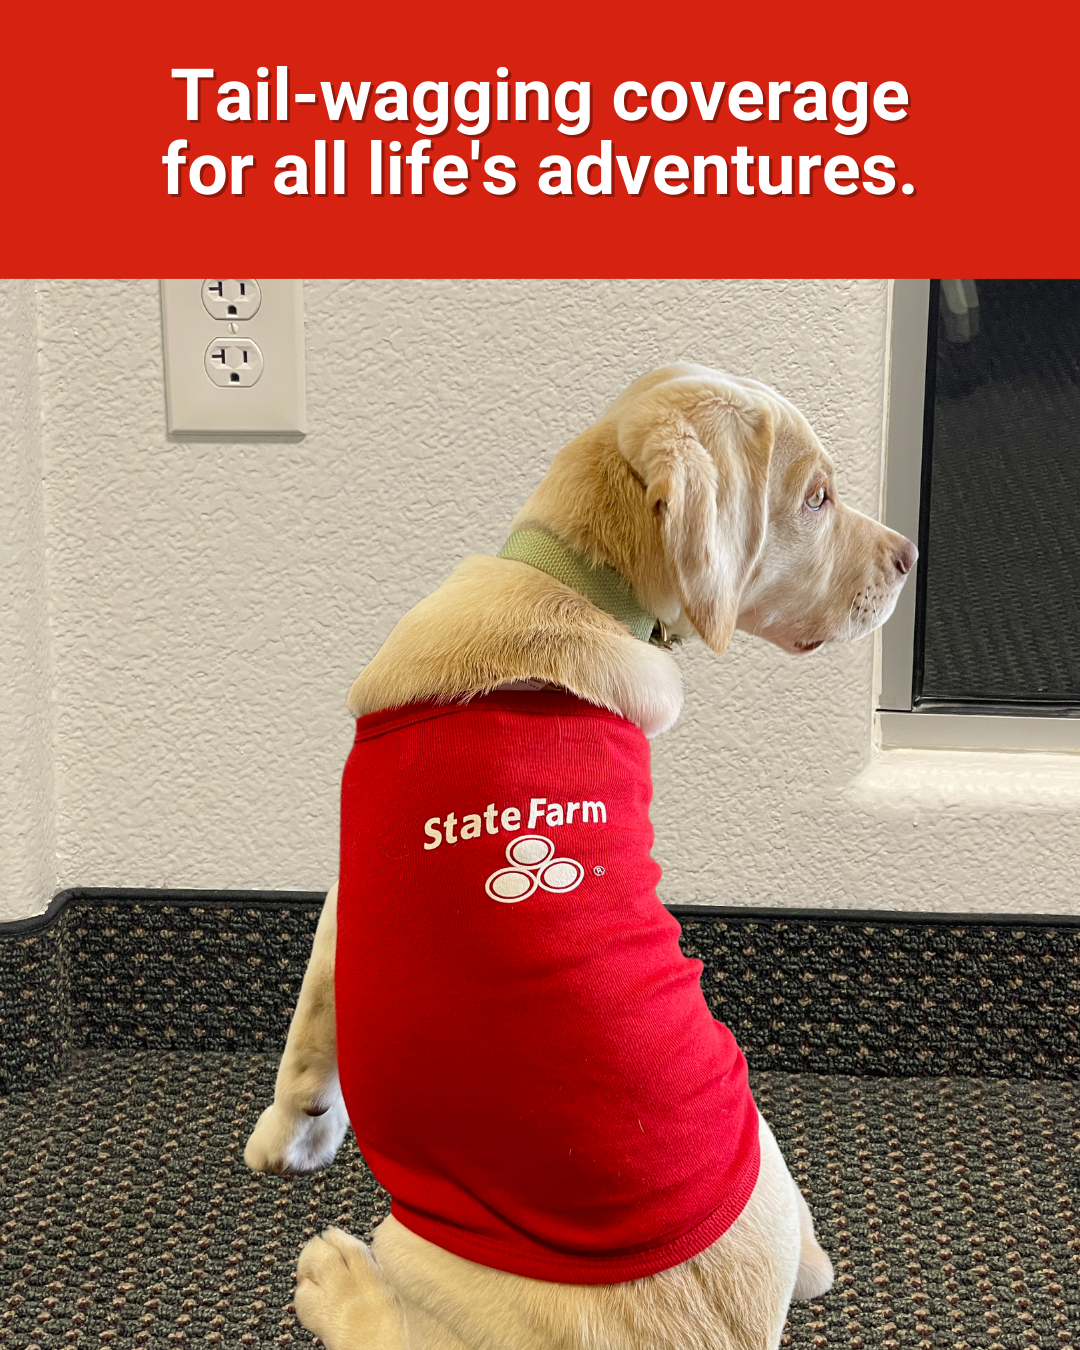 Tail-wagging coverage for all life's adventures. Aaron Slater Jr - State Farm Insurance Agent Columbia (240)755-0133